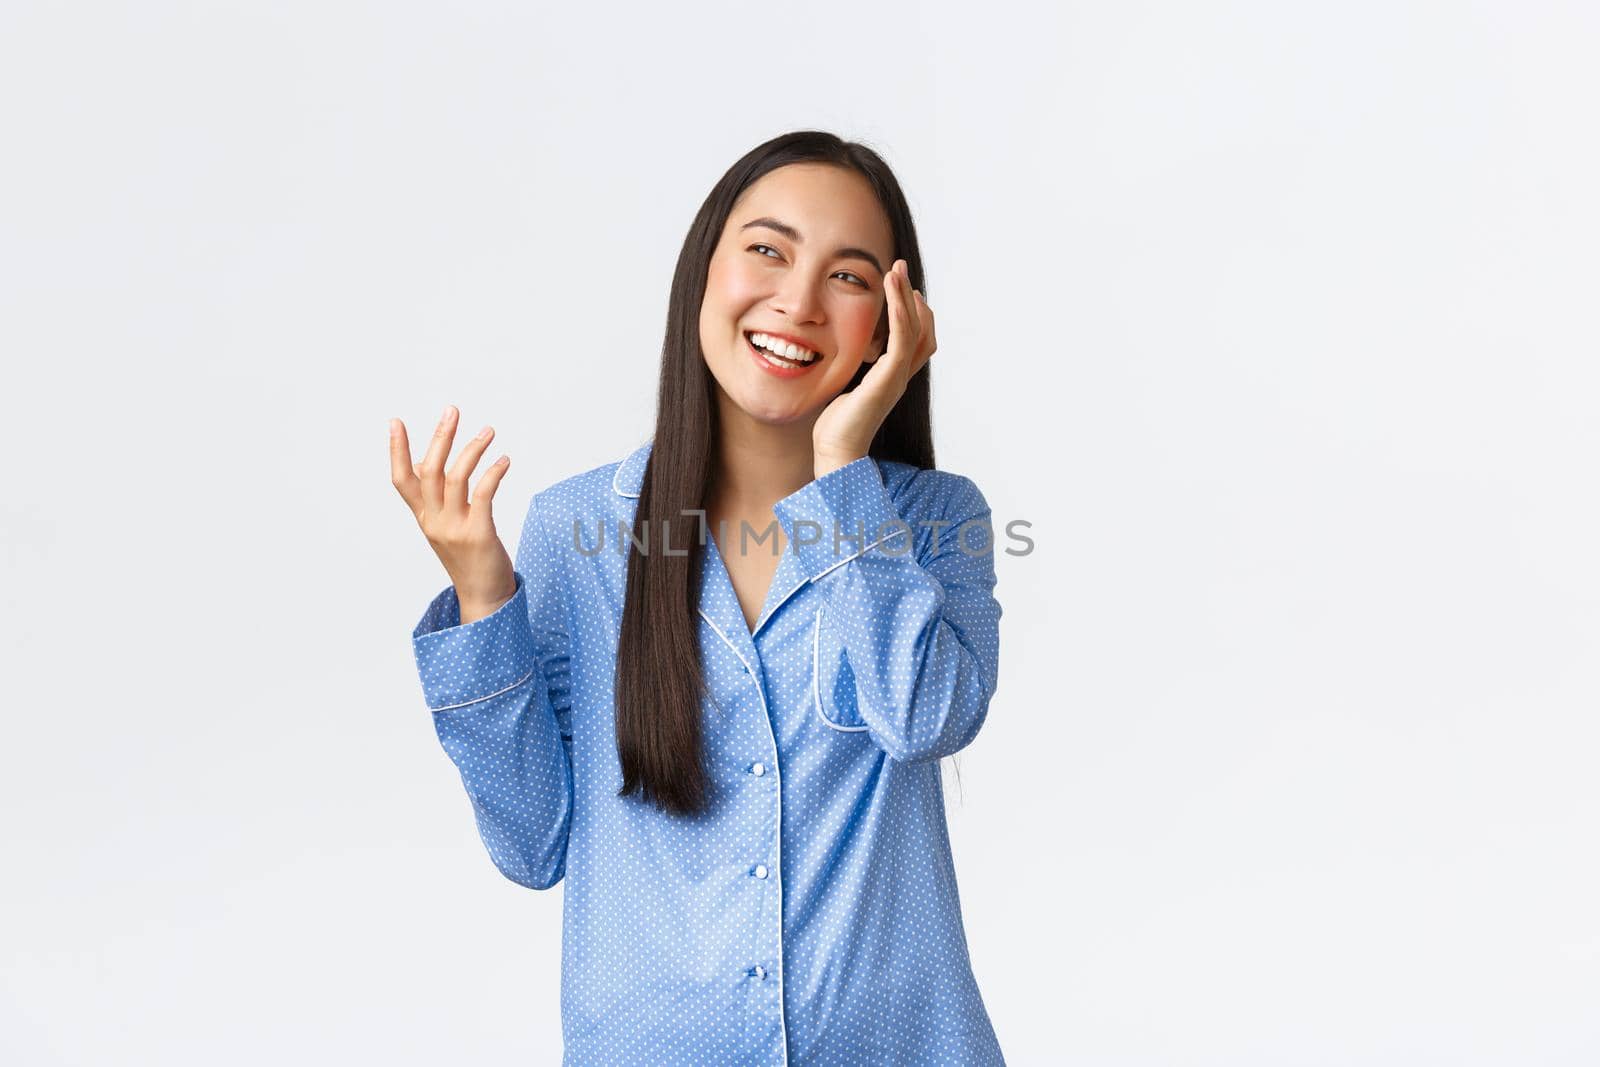 Beautiful asian girl getting ready sleep, touching soft clean face after applying skincare night products, wearing pajamas, laughing and looking upper left corner happy, white background.